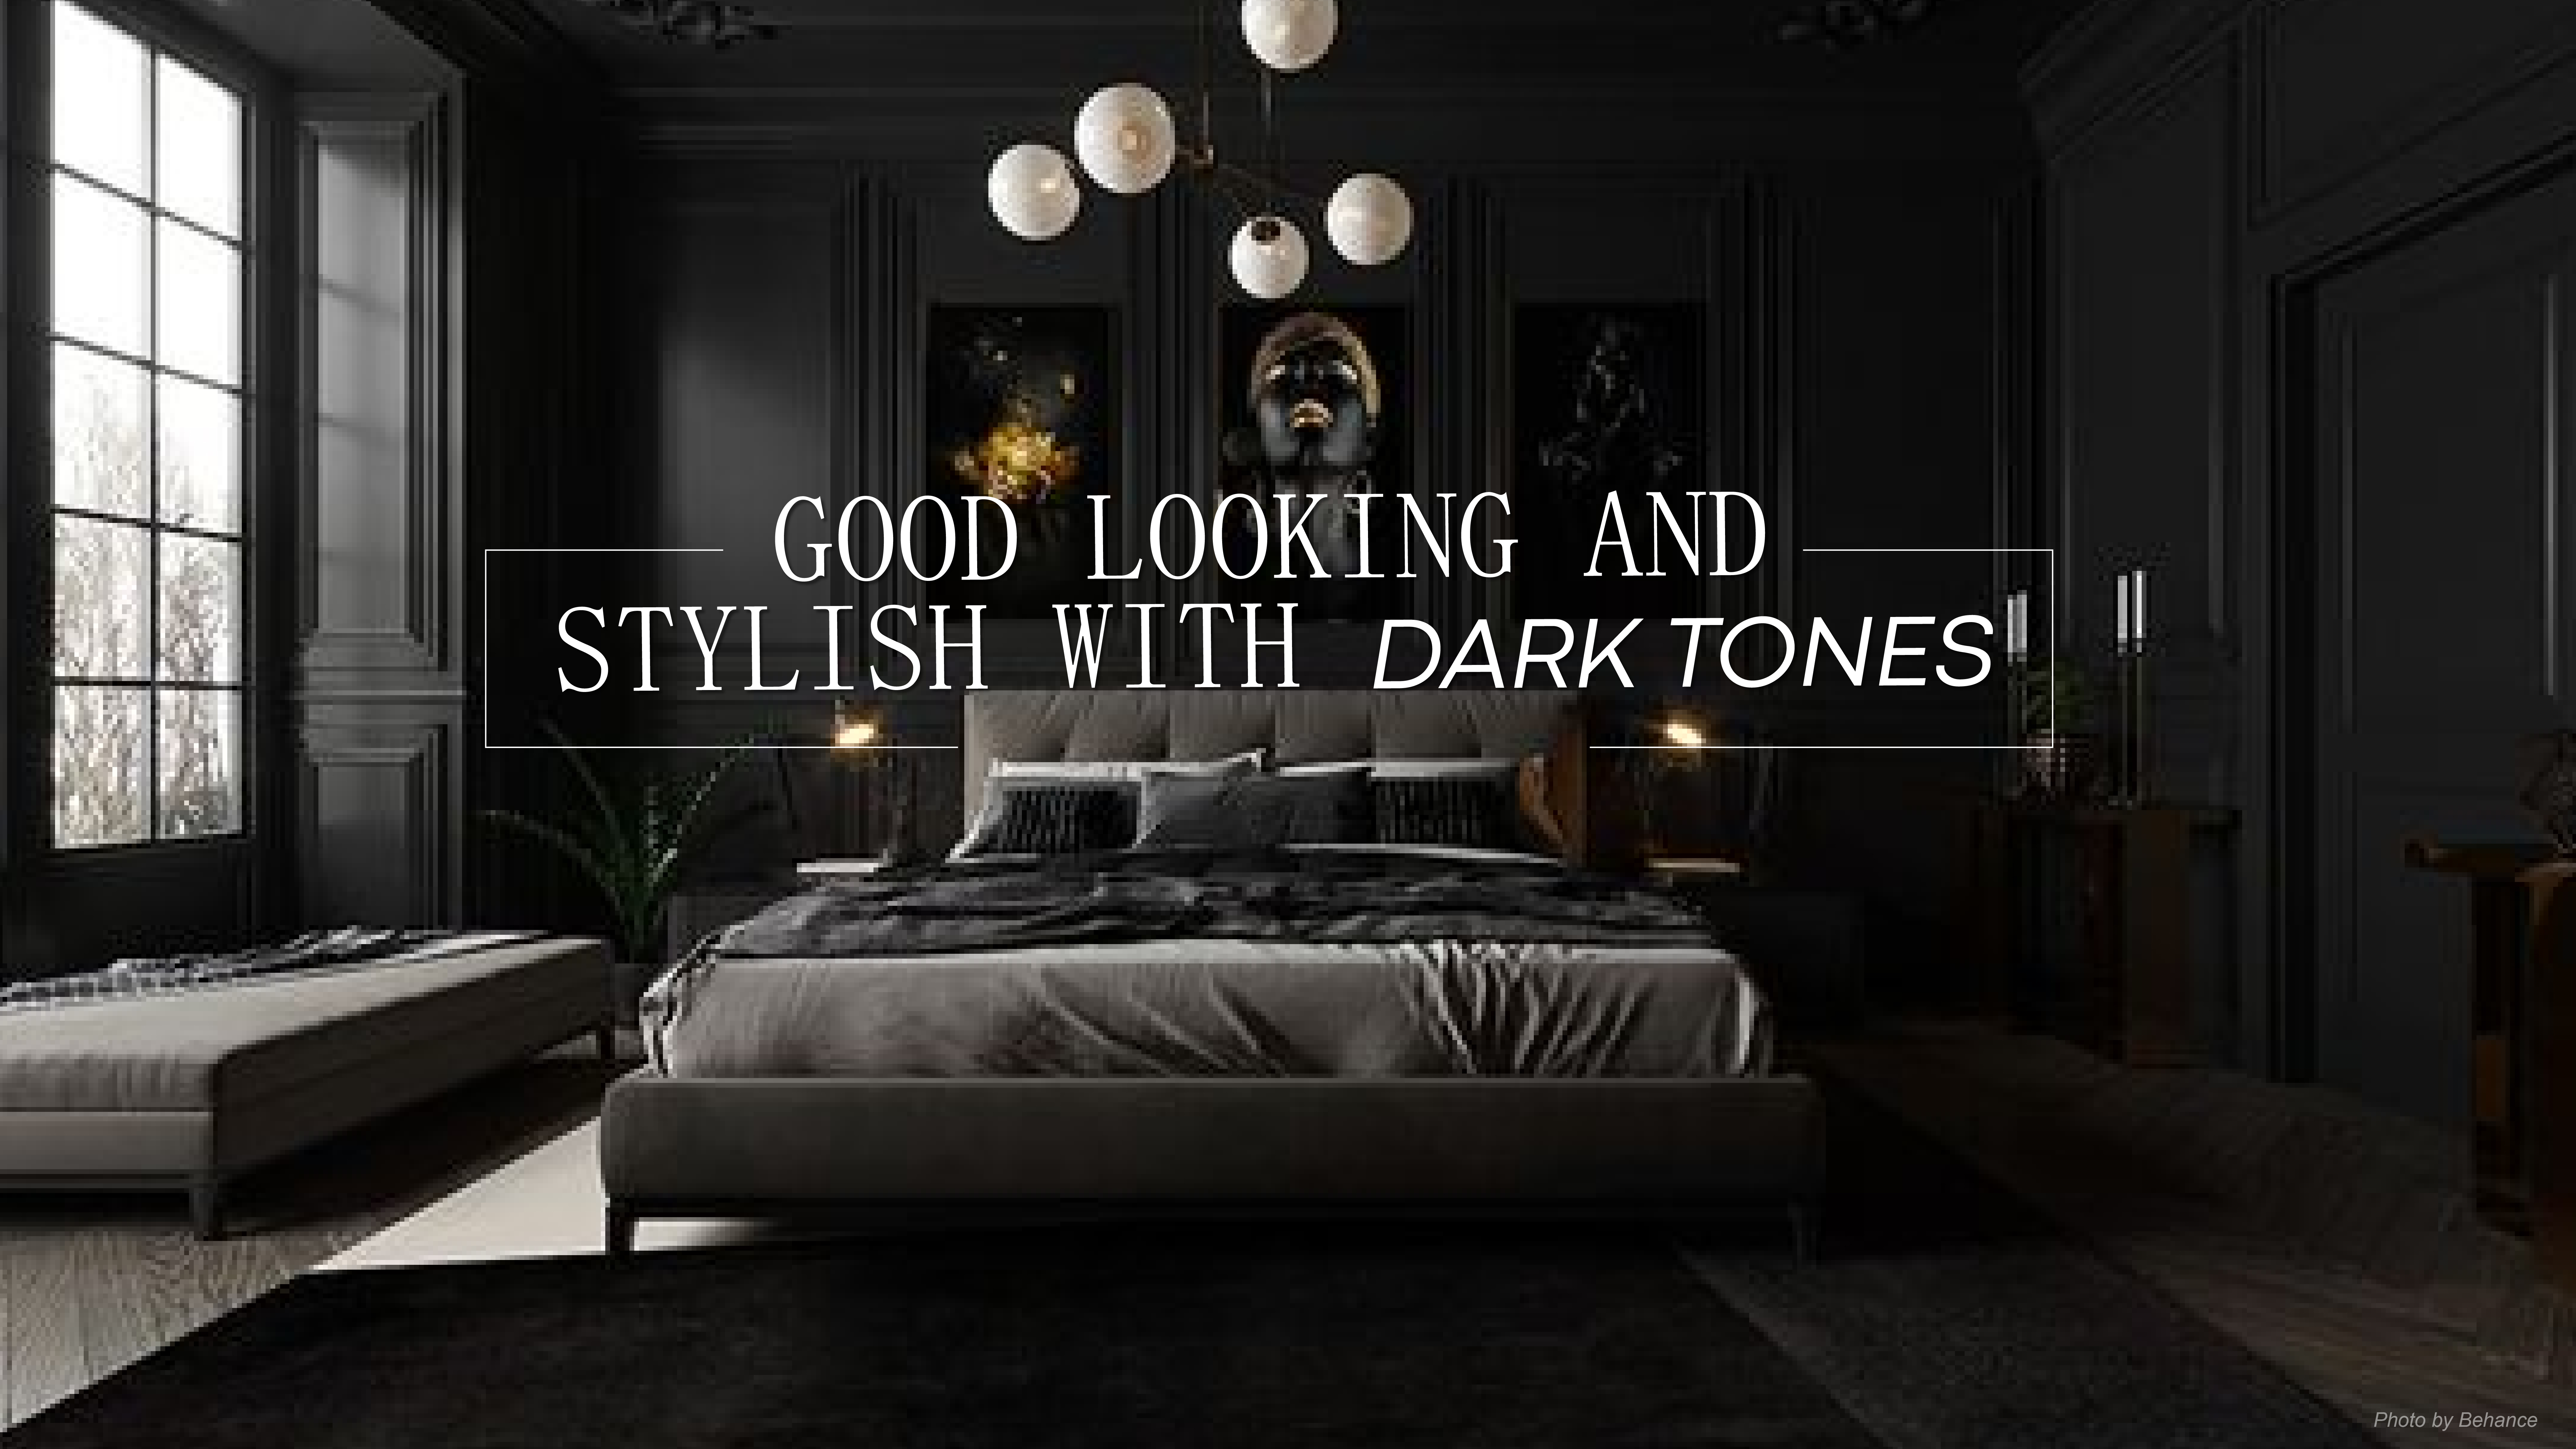 GOOD LOOKING AND STYLISH WITH DARK TONES